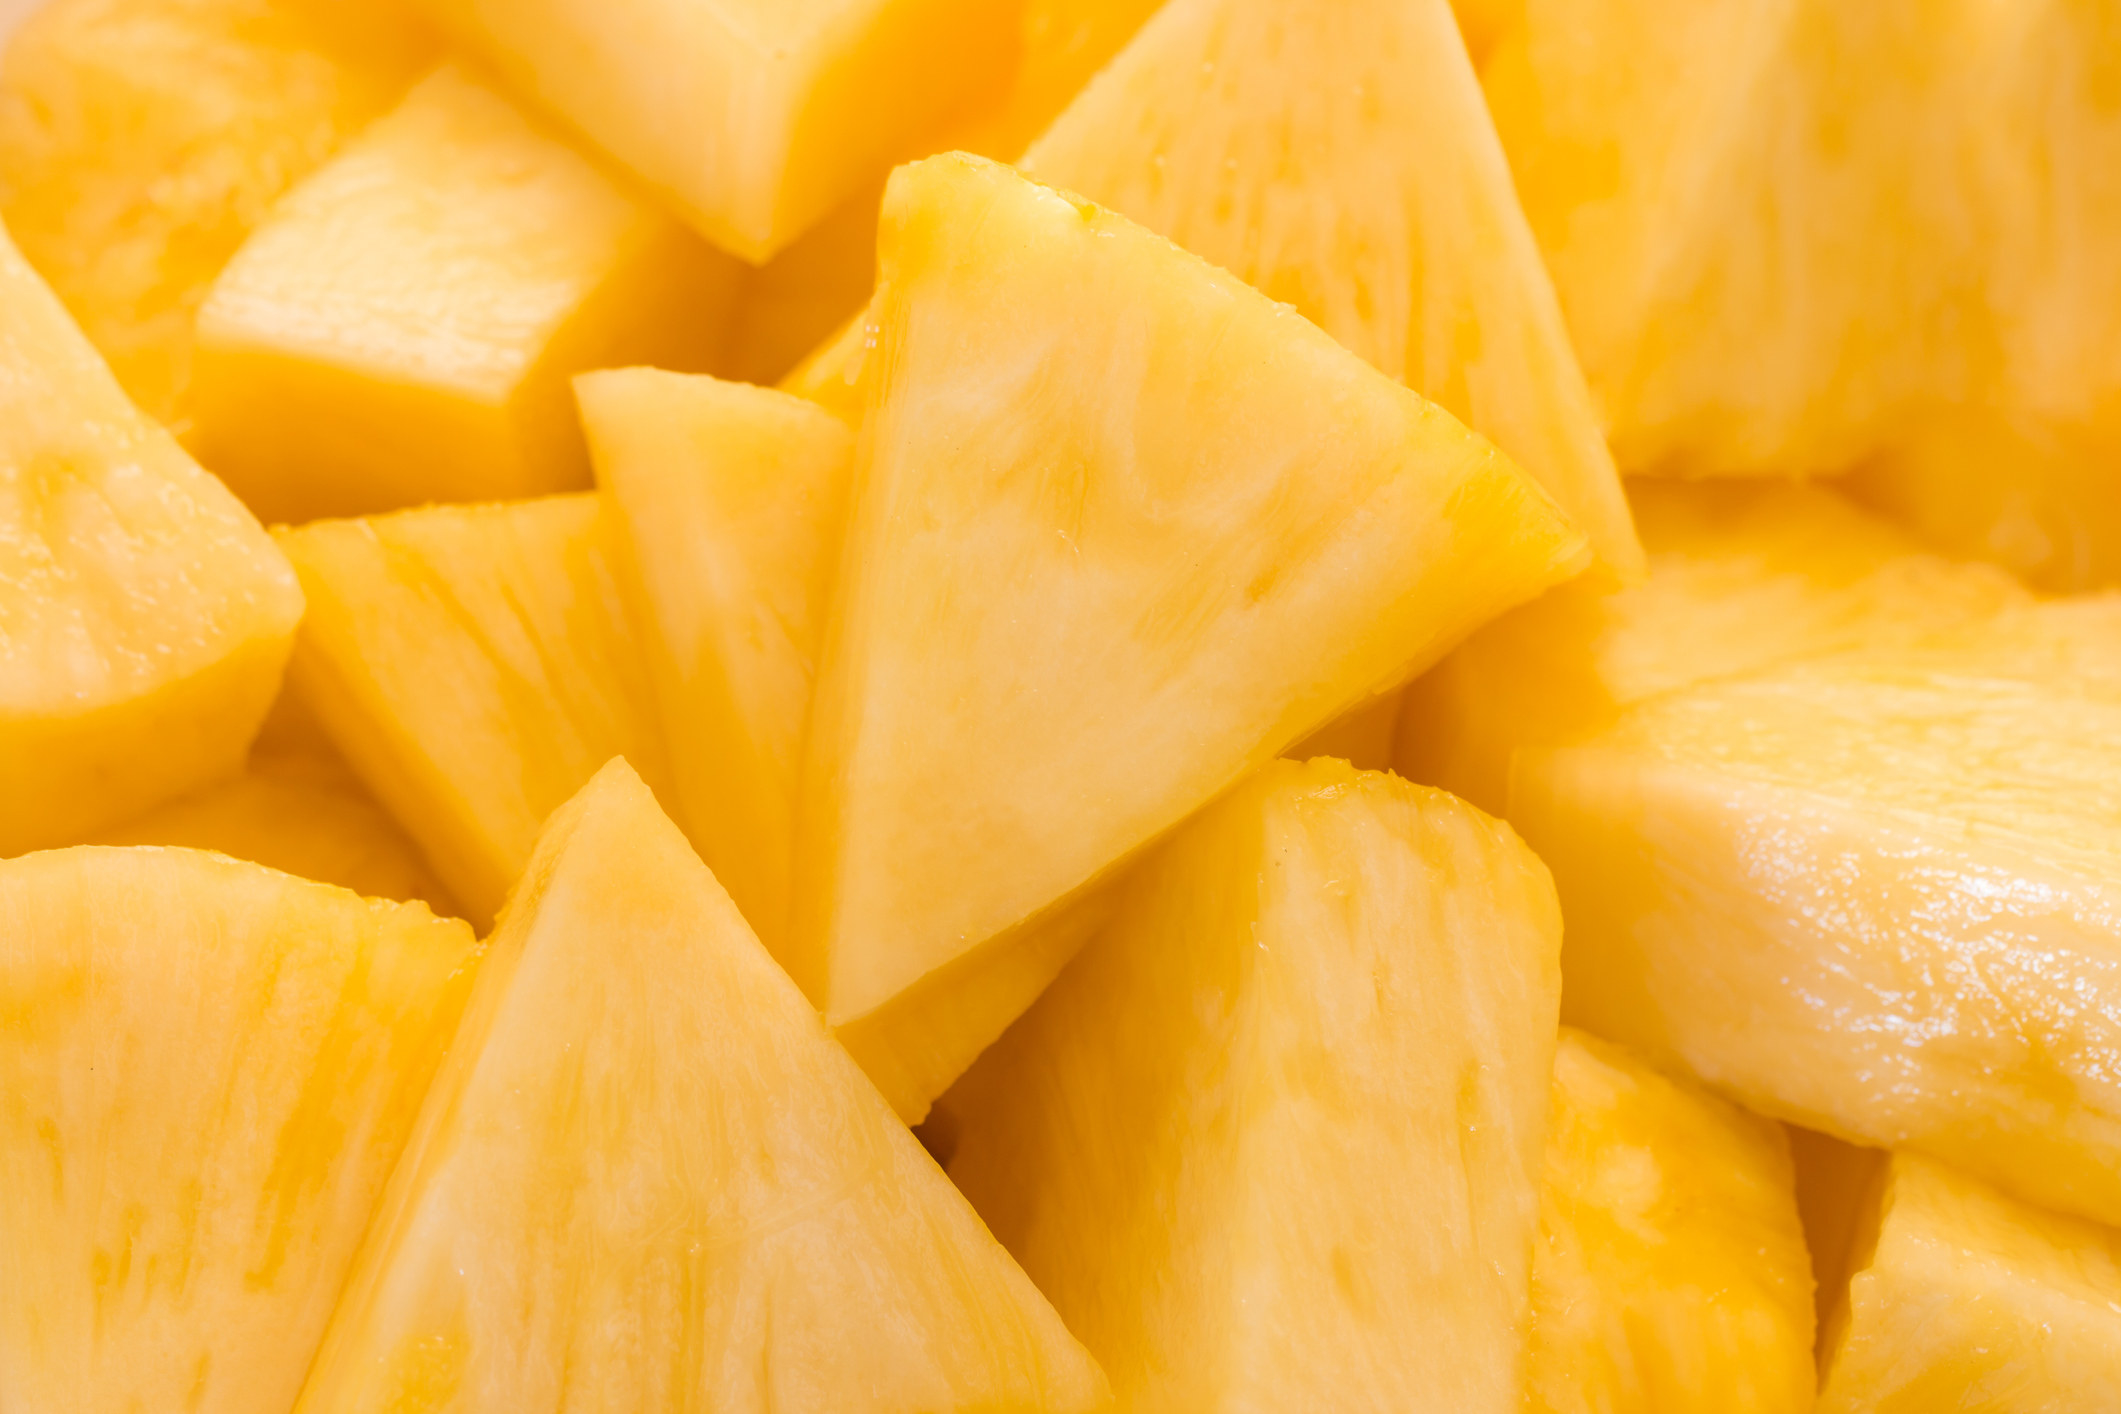 Sliced pineapple triangles.